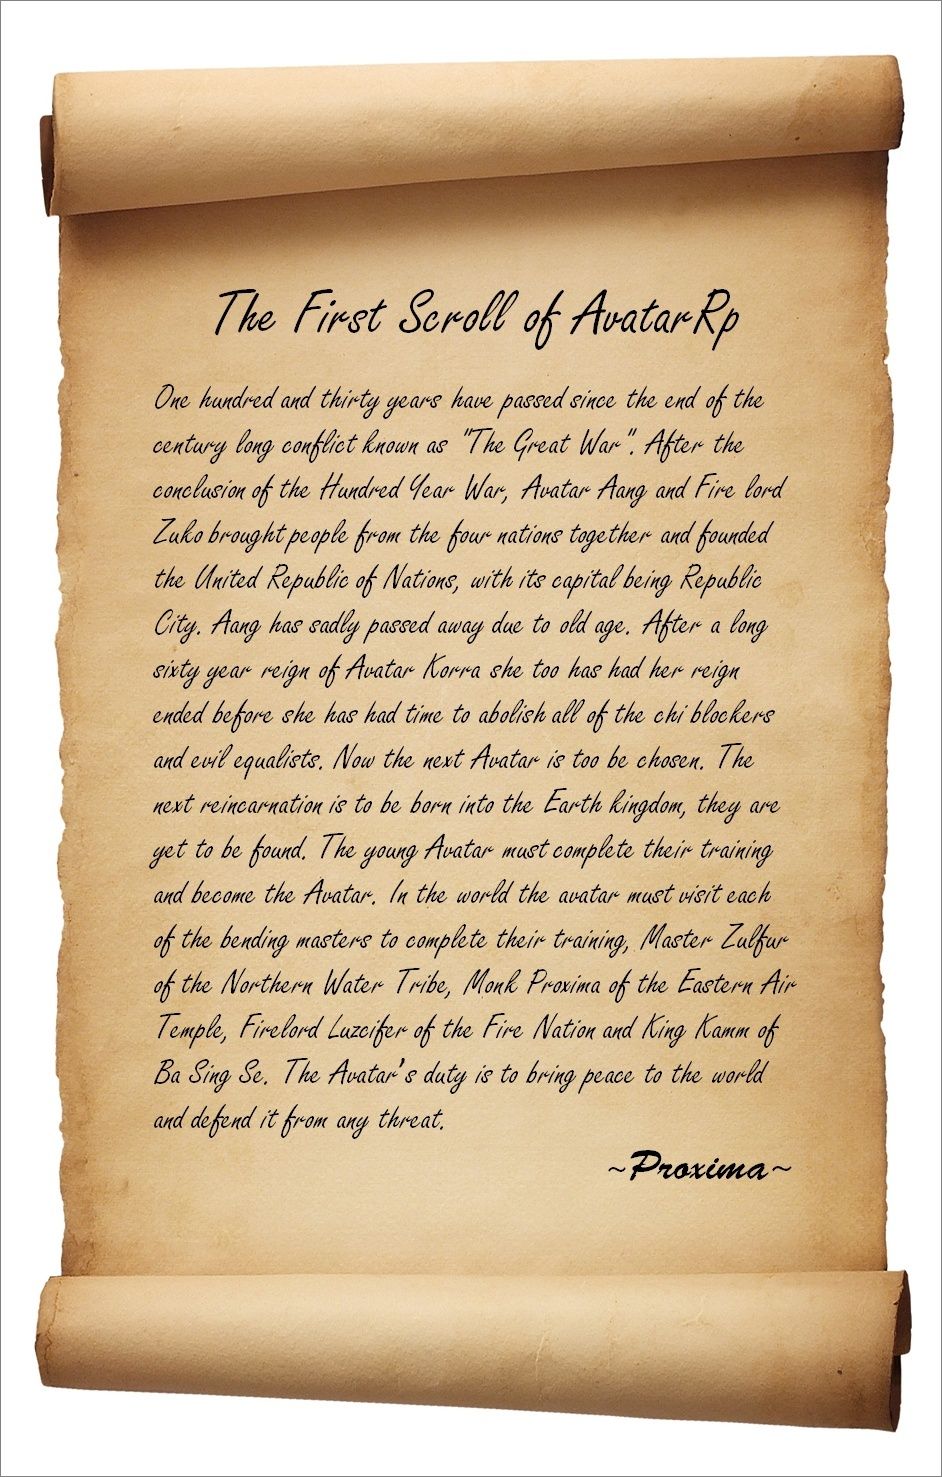 The First Scroll of AvatarRp Pictur12